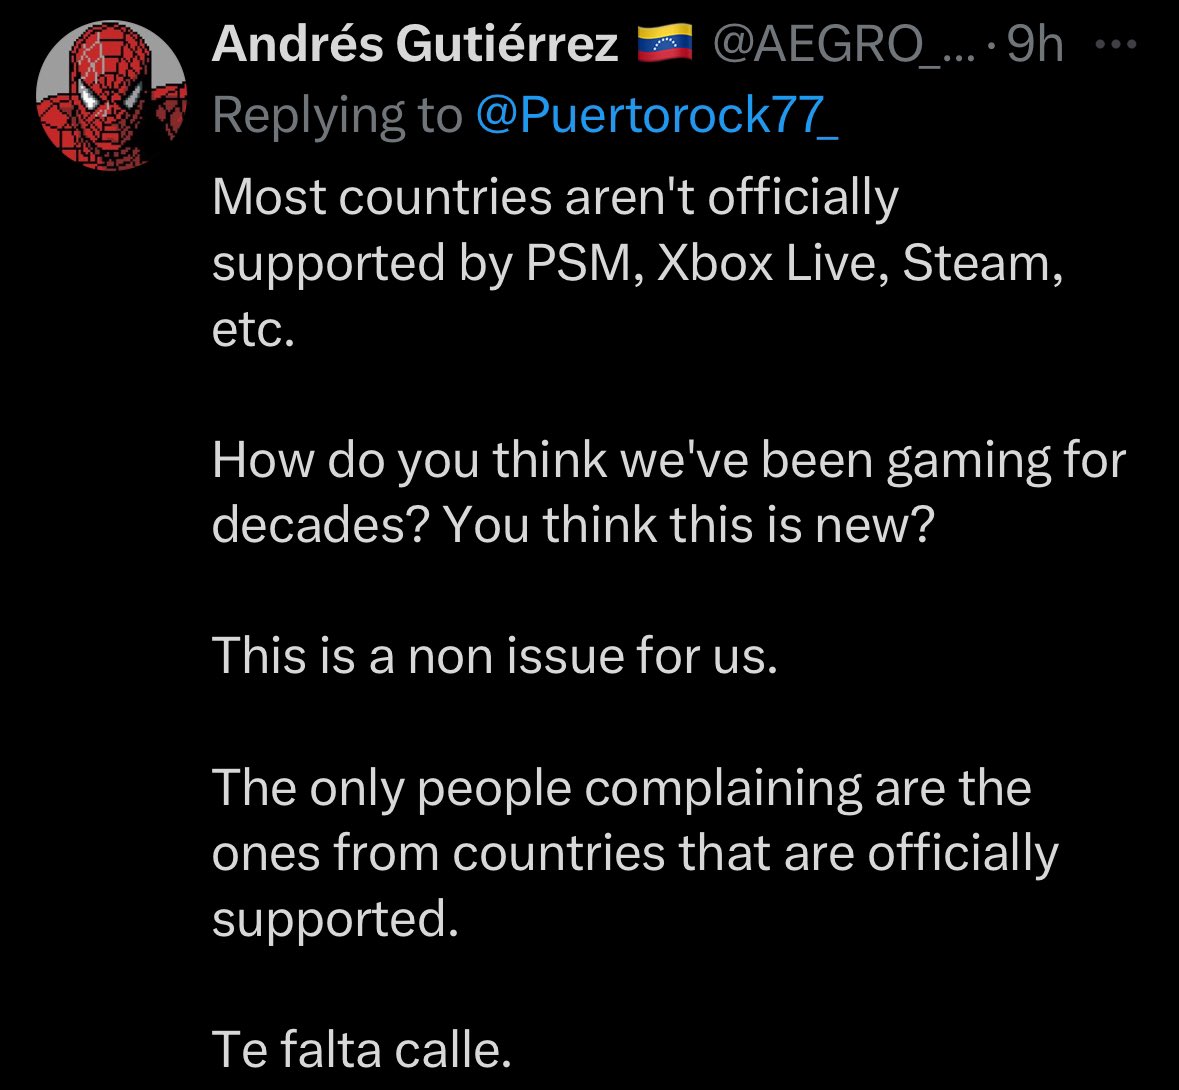 I’ve noticed people in countries unsupported by PSN are whining less than people in supported countries. 🤔